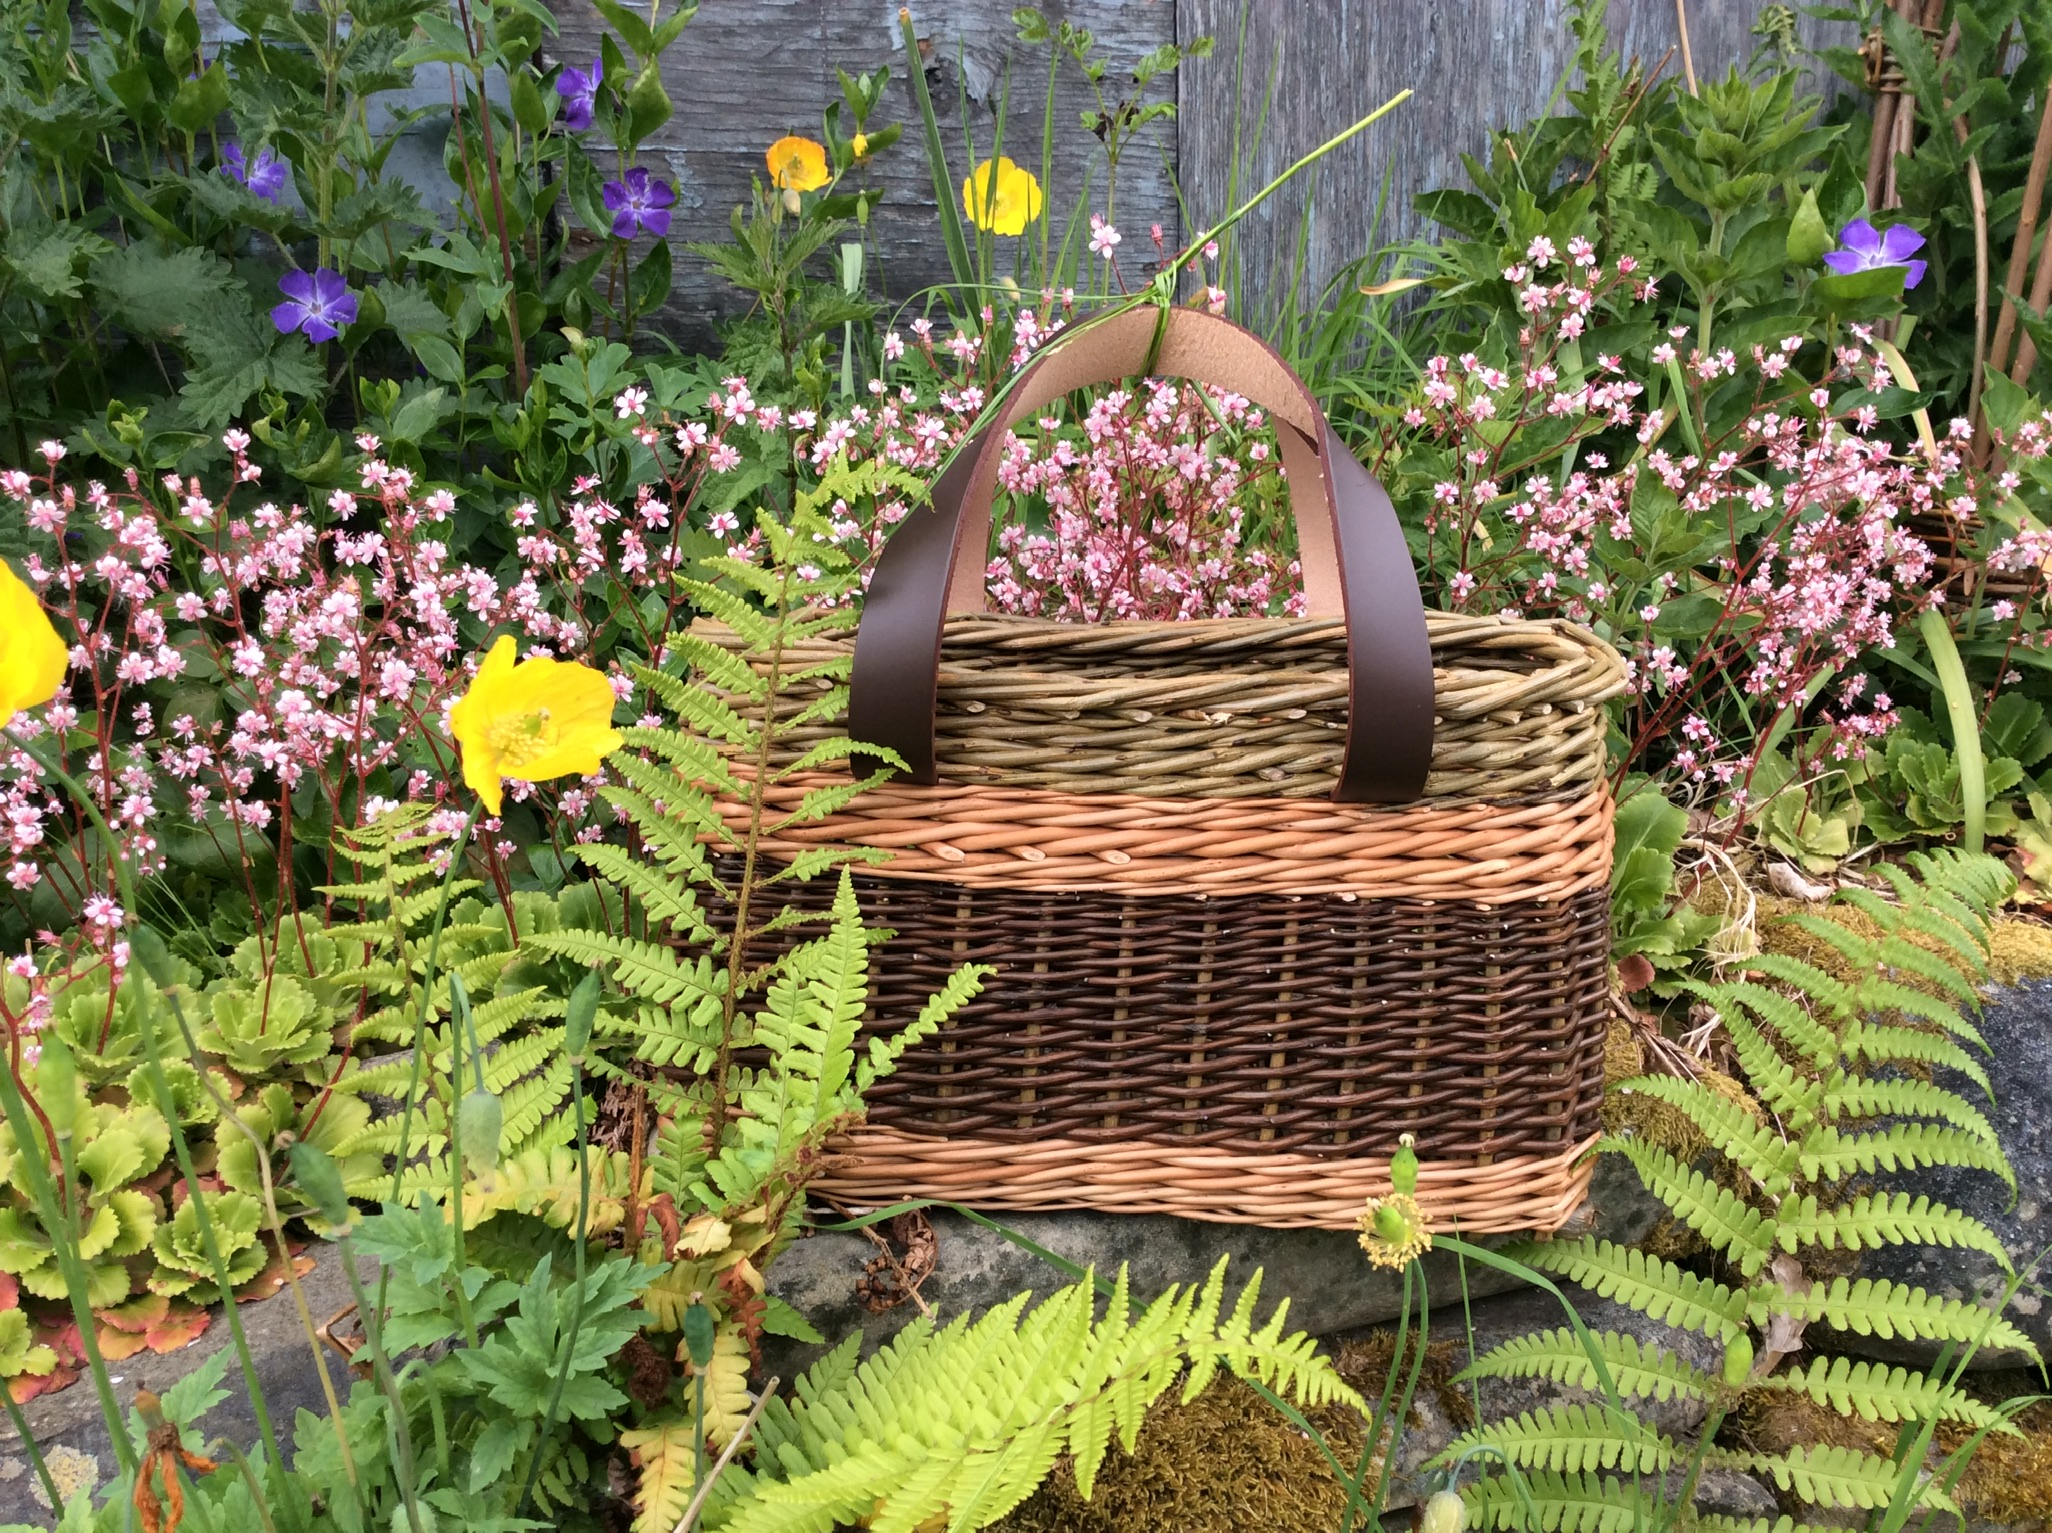 West Wales Willows Basket taken from Willow by Jenny Crisp